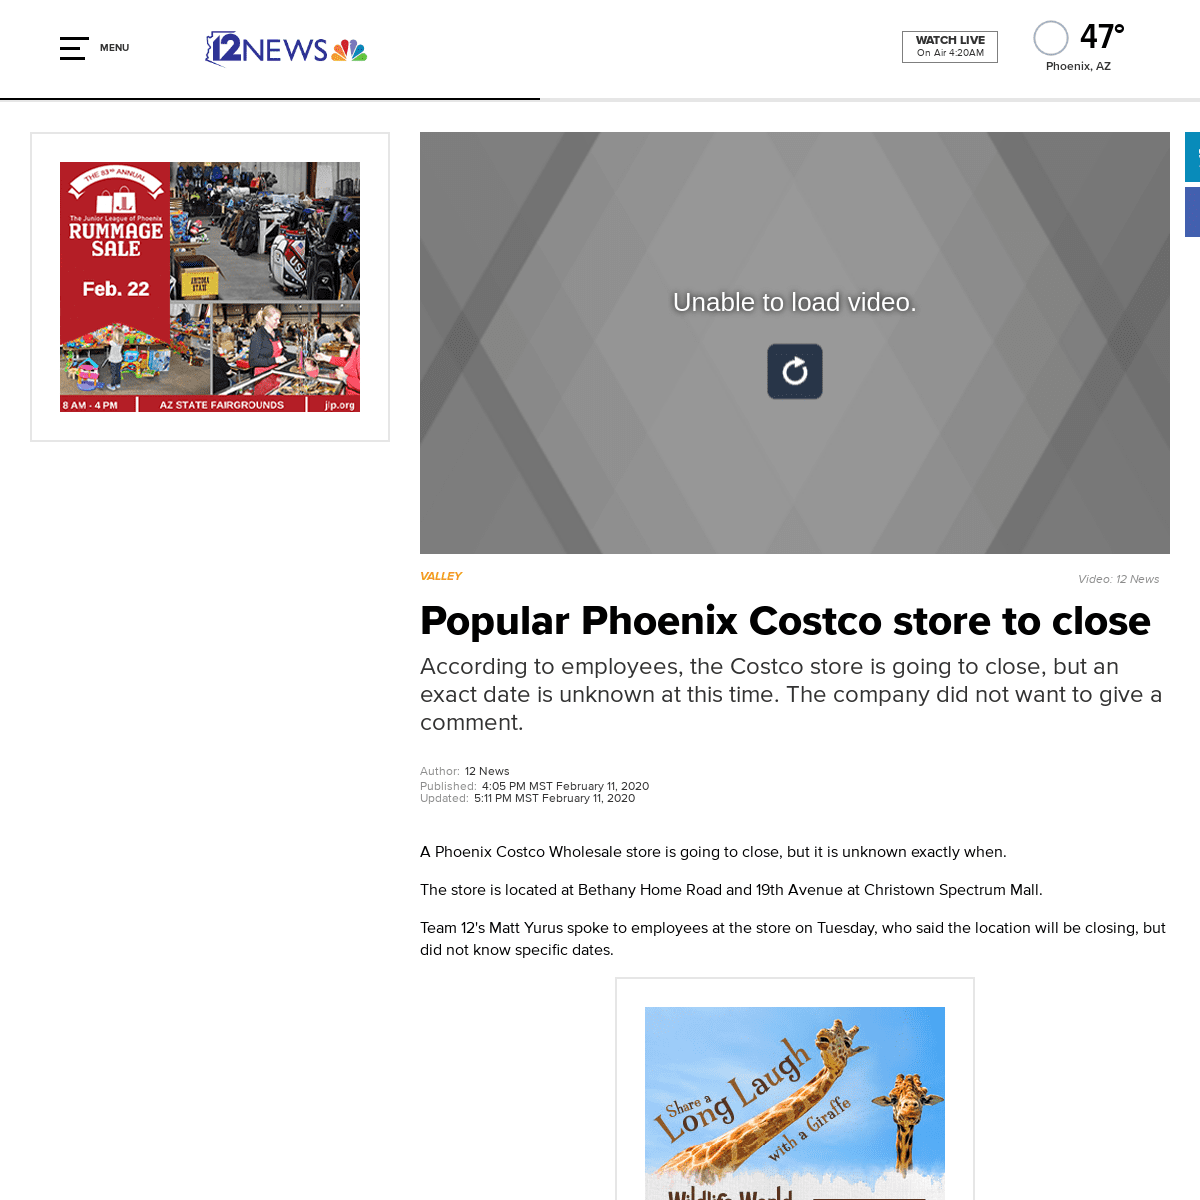 A complete backup of www.12news.com/article/news/local/valley/popular-phoenix-costco-store-to-close-company-confirms/75-38db85bd